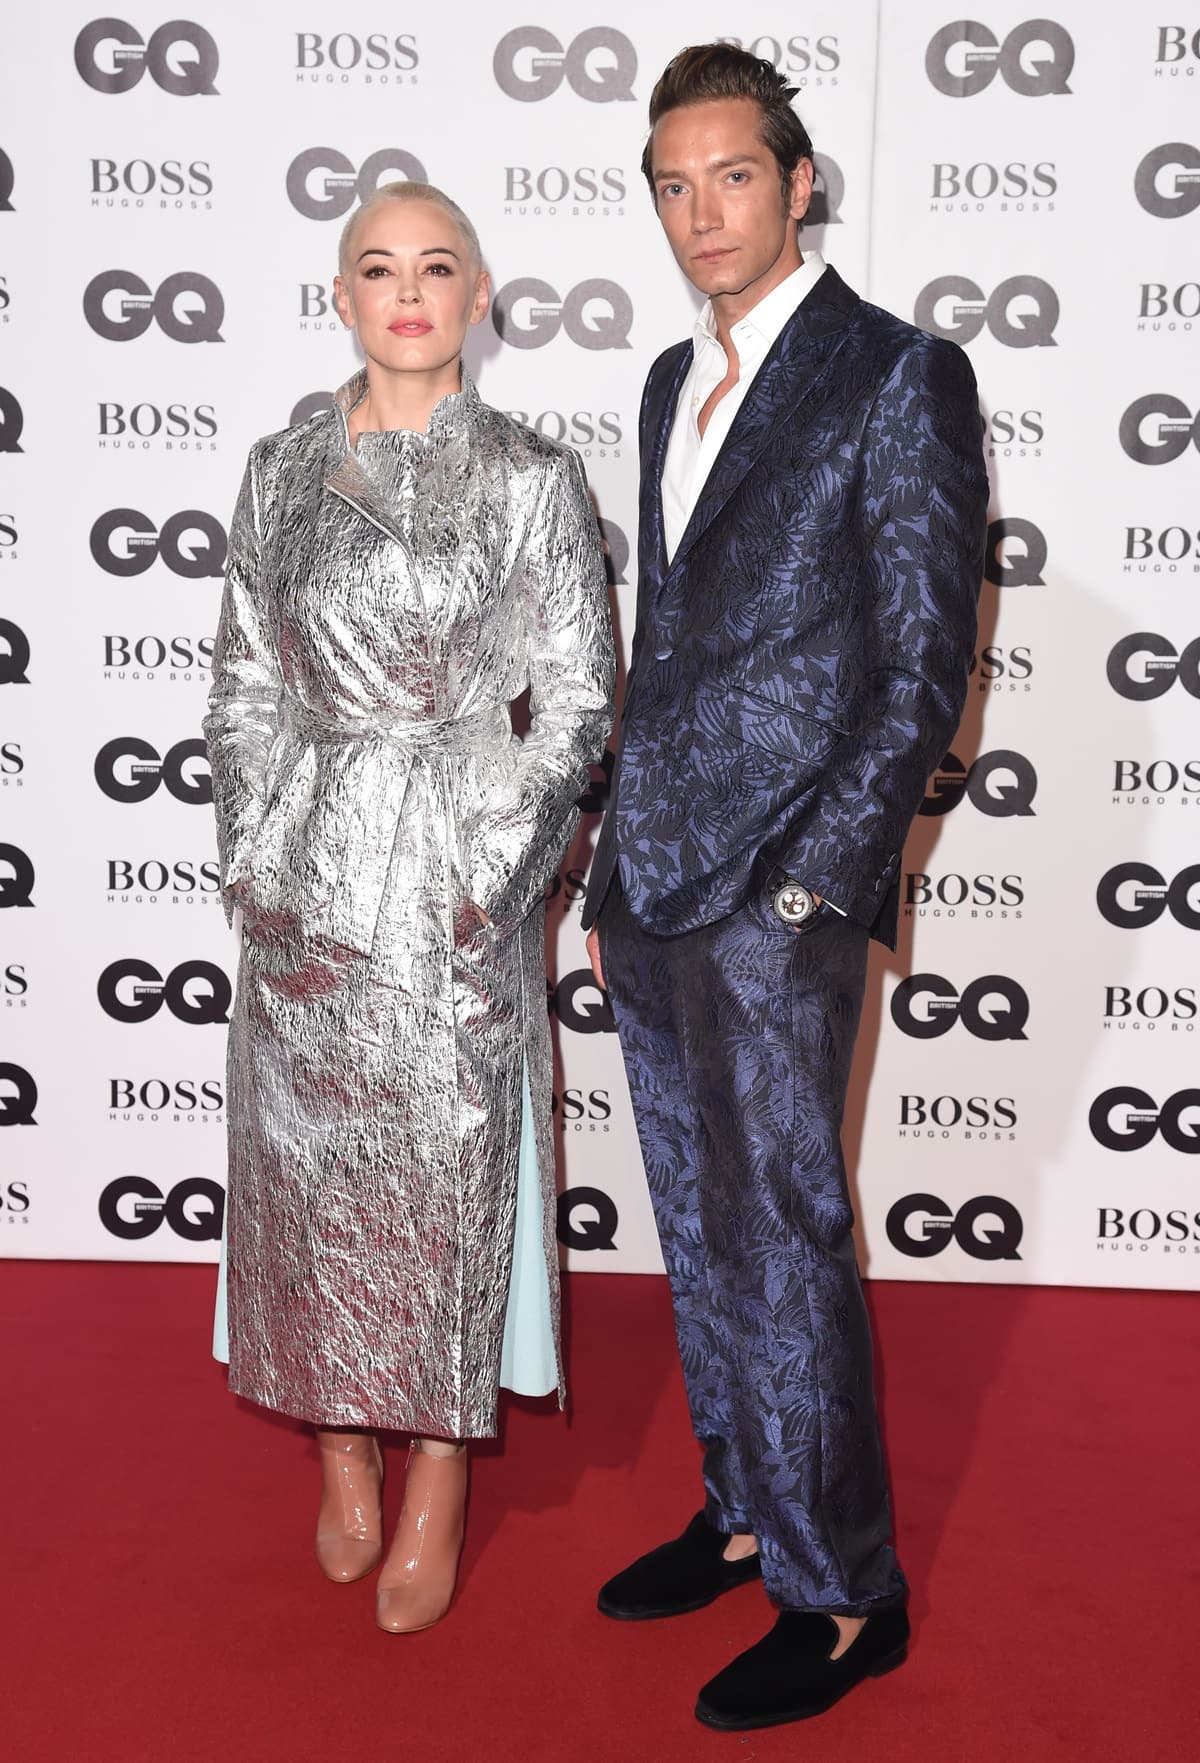 Tomas Auksa (L) and the notably shorter Rose McGowan, who stands at 5 feet 3 inches (160 cm) in height, attended the GQ Men of the Year Awards 2018 in association with HUGO BOSS